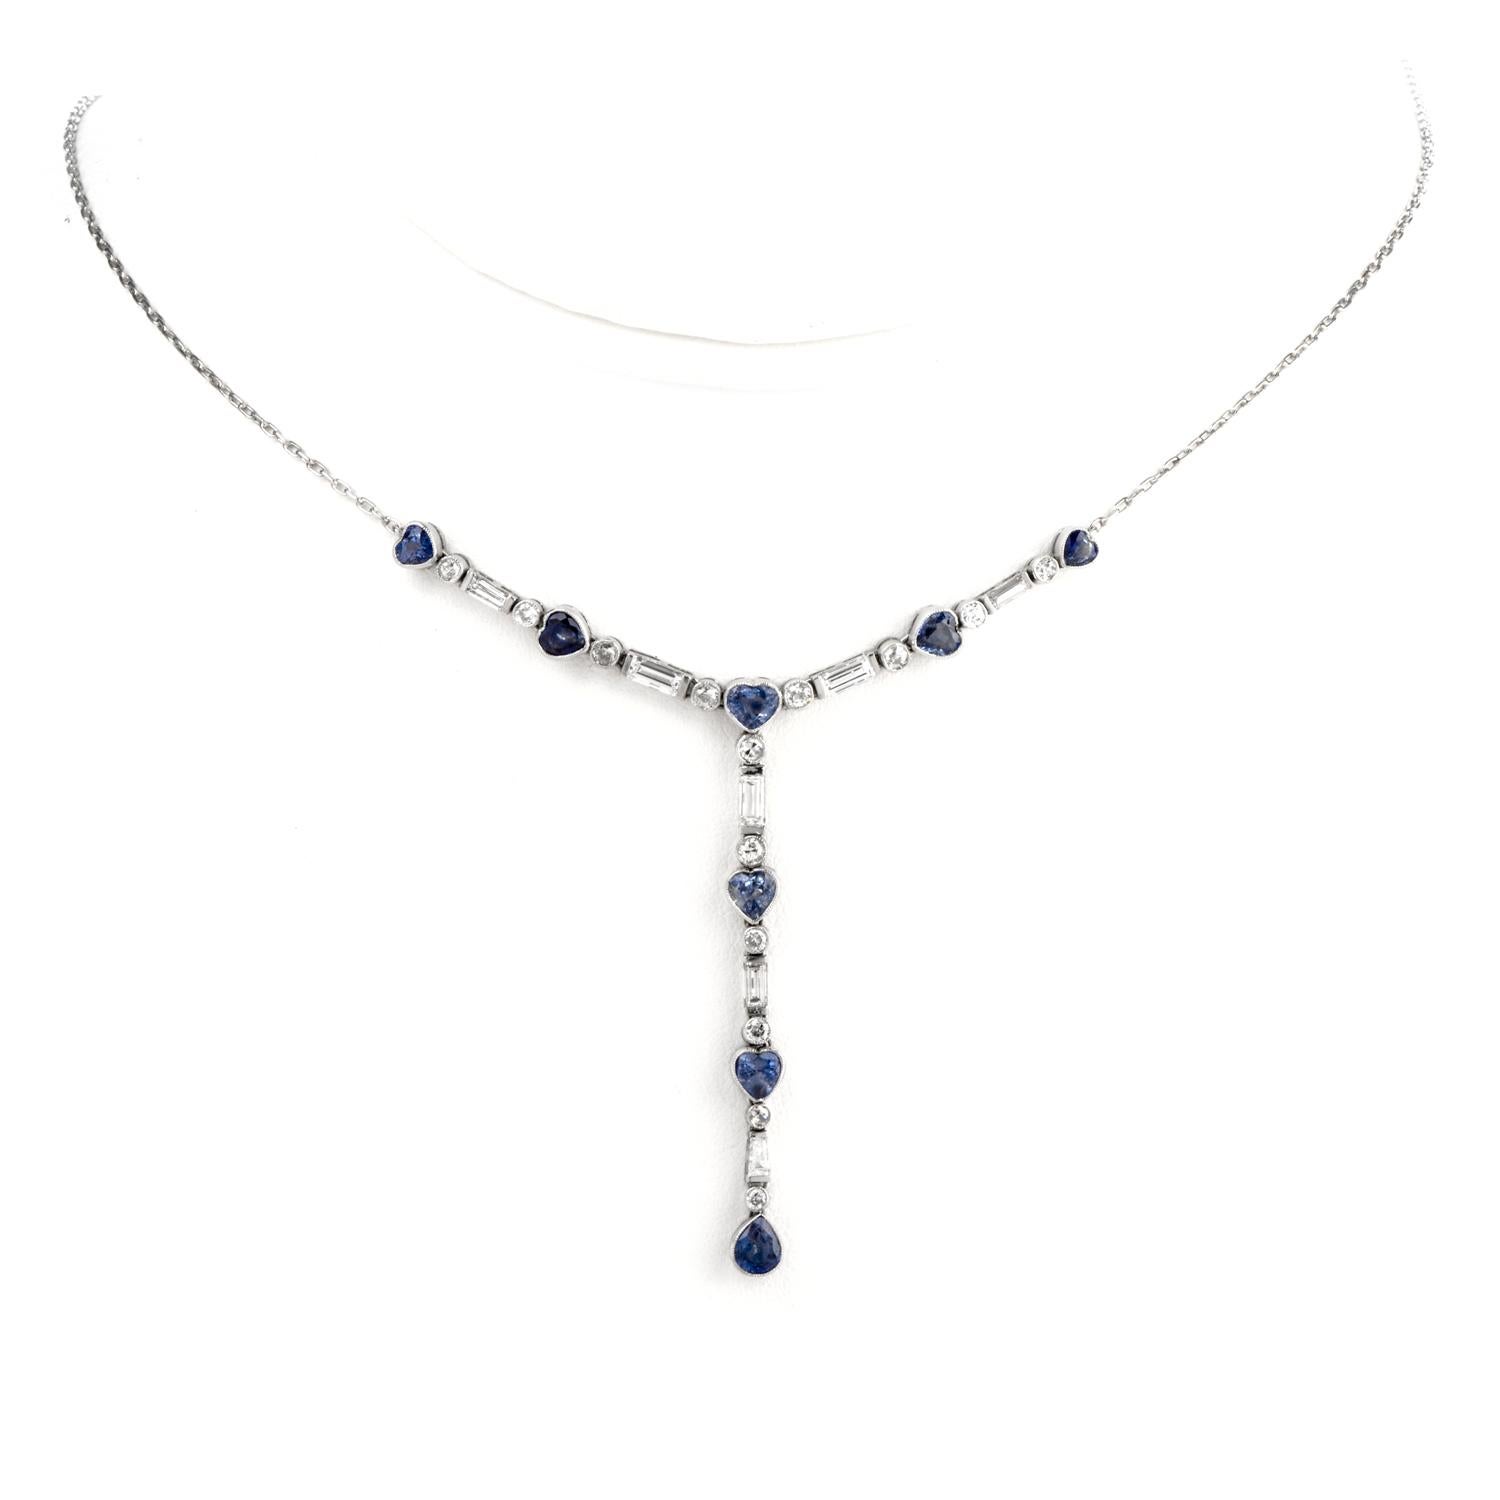 This Playful yet Romantic Diamond and Tanzanite necklace was inspired

in a Y necklace design and crafted in Platinum.

Heart shaped Tanzanite adorn throughout and weigh

approximately 2.00 carats.

Diamonds weigh approximately 2.20 carats and are